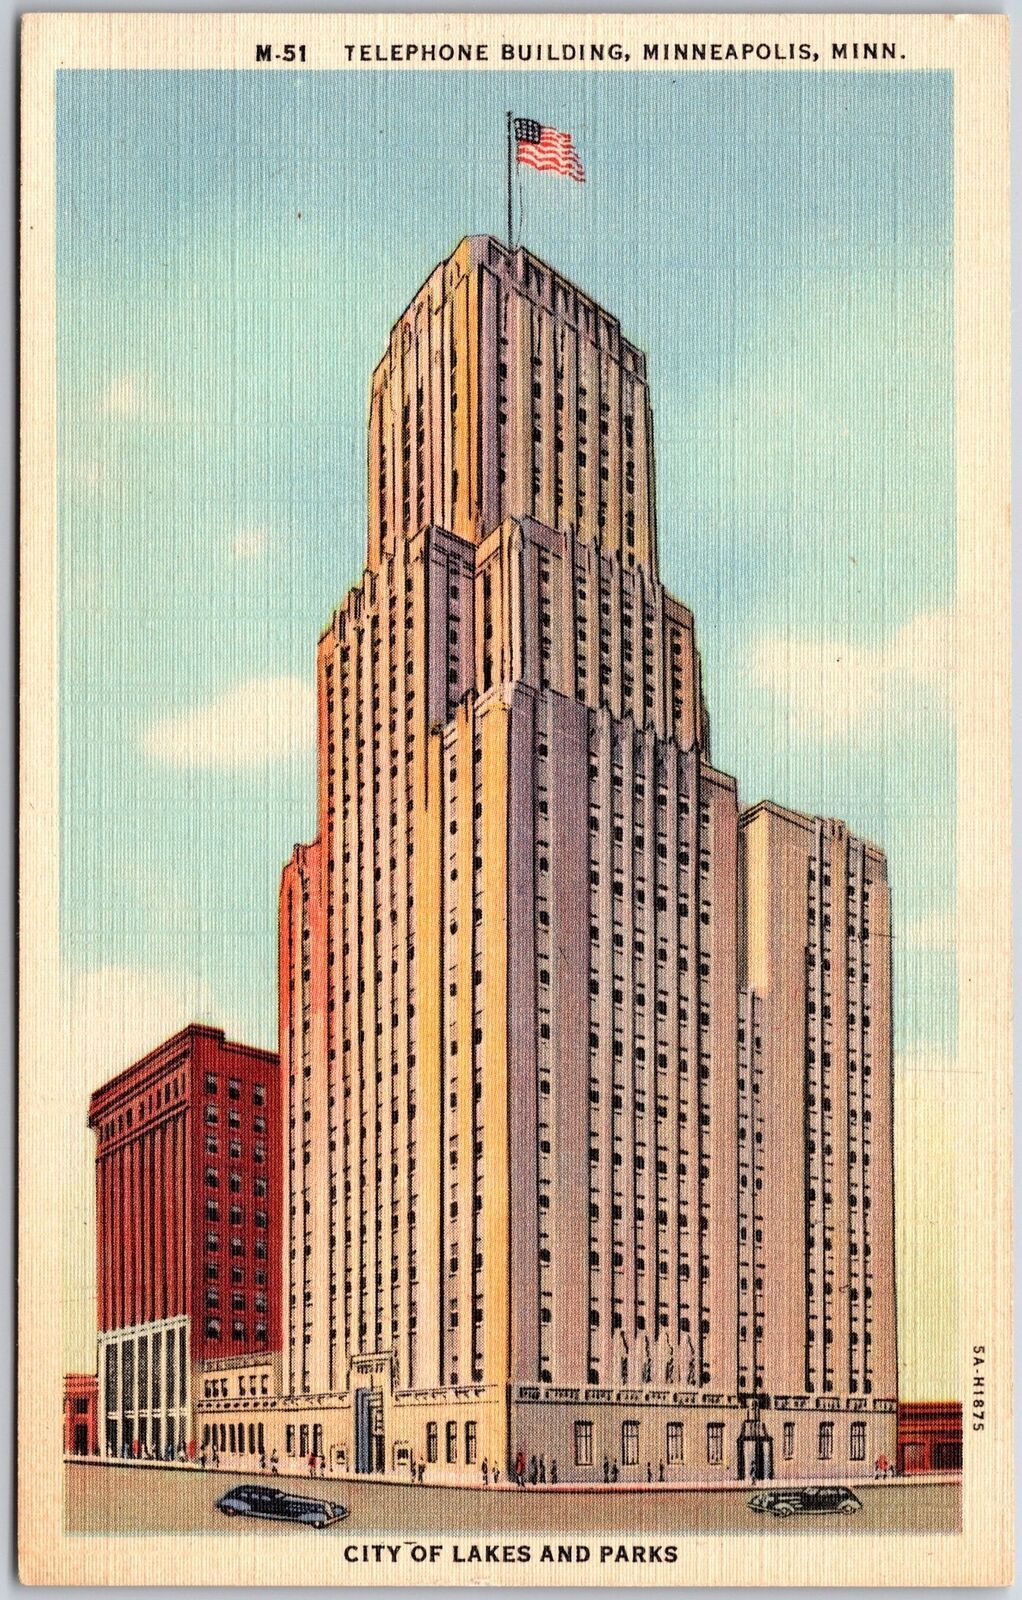 Telephone Building Minneapolis Minnesota MN City Of Lakes And Parks Postcard